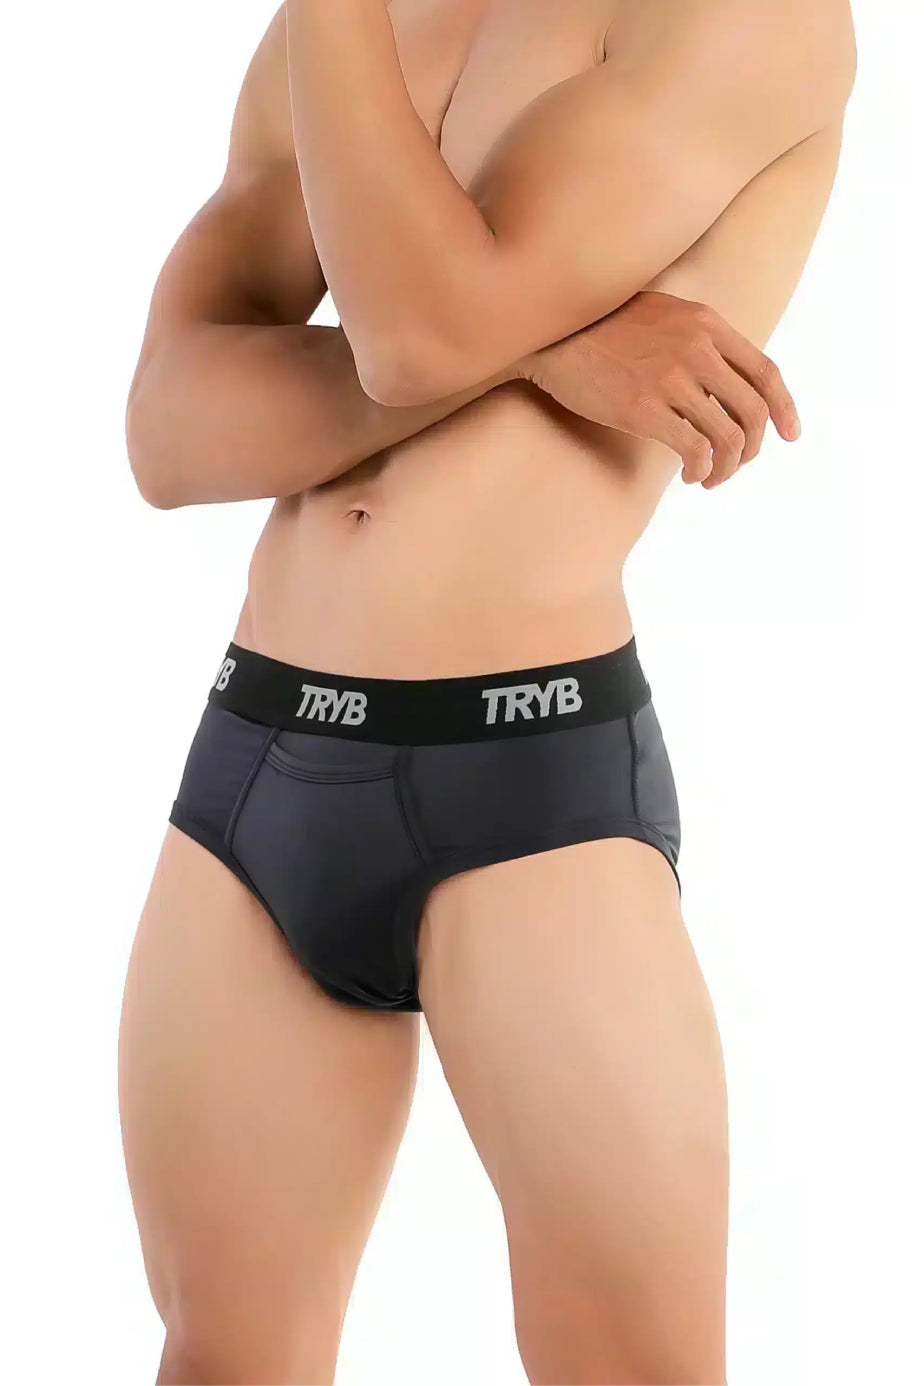 Created for Fitness, Designed for Life  INDIA'S 1ST SPORTS INNERWEAR –  Trybwear